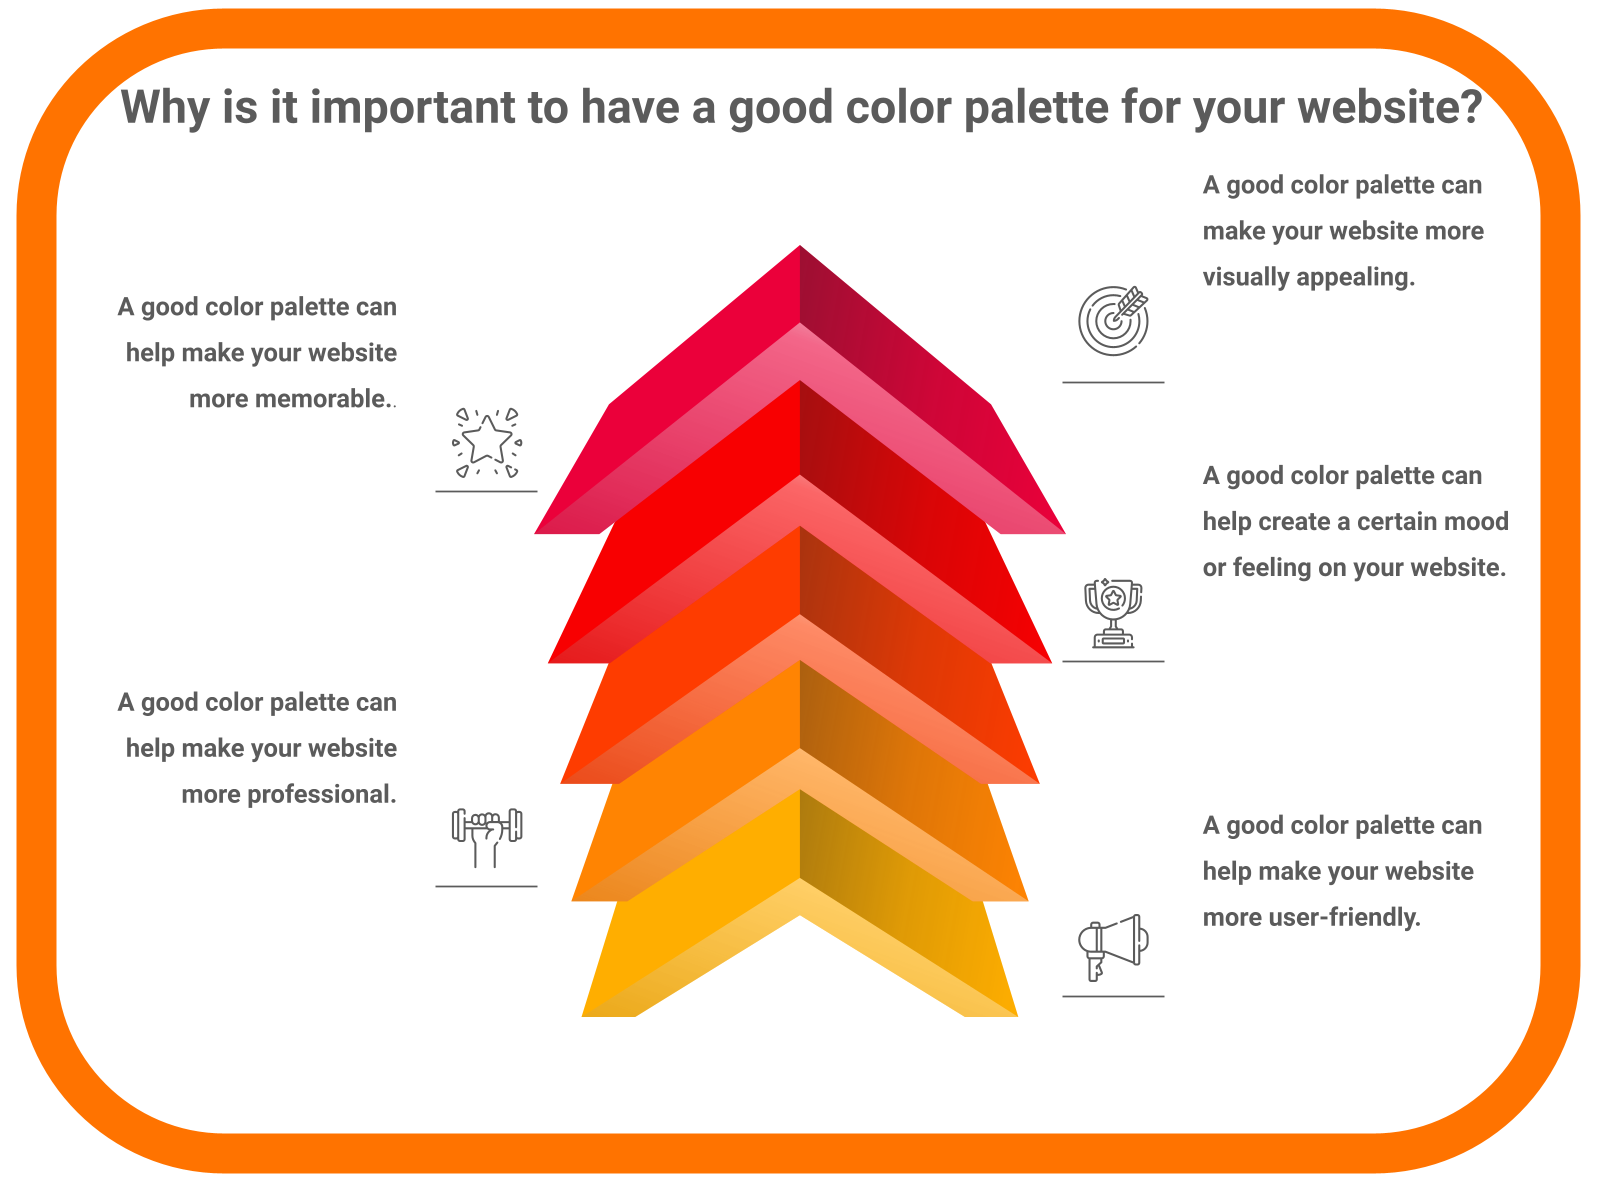 Why is it important to have a good color pattern for your website?